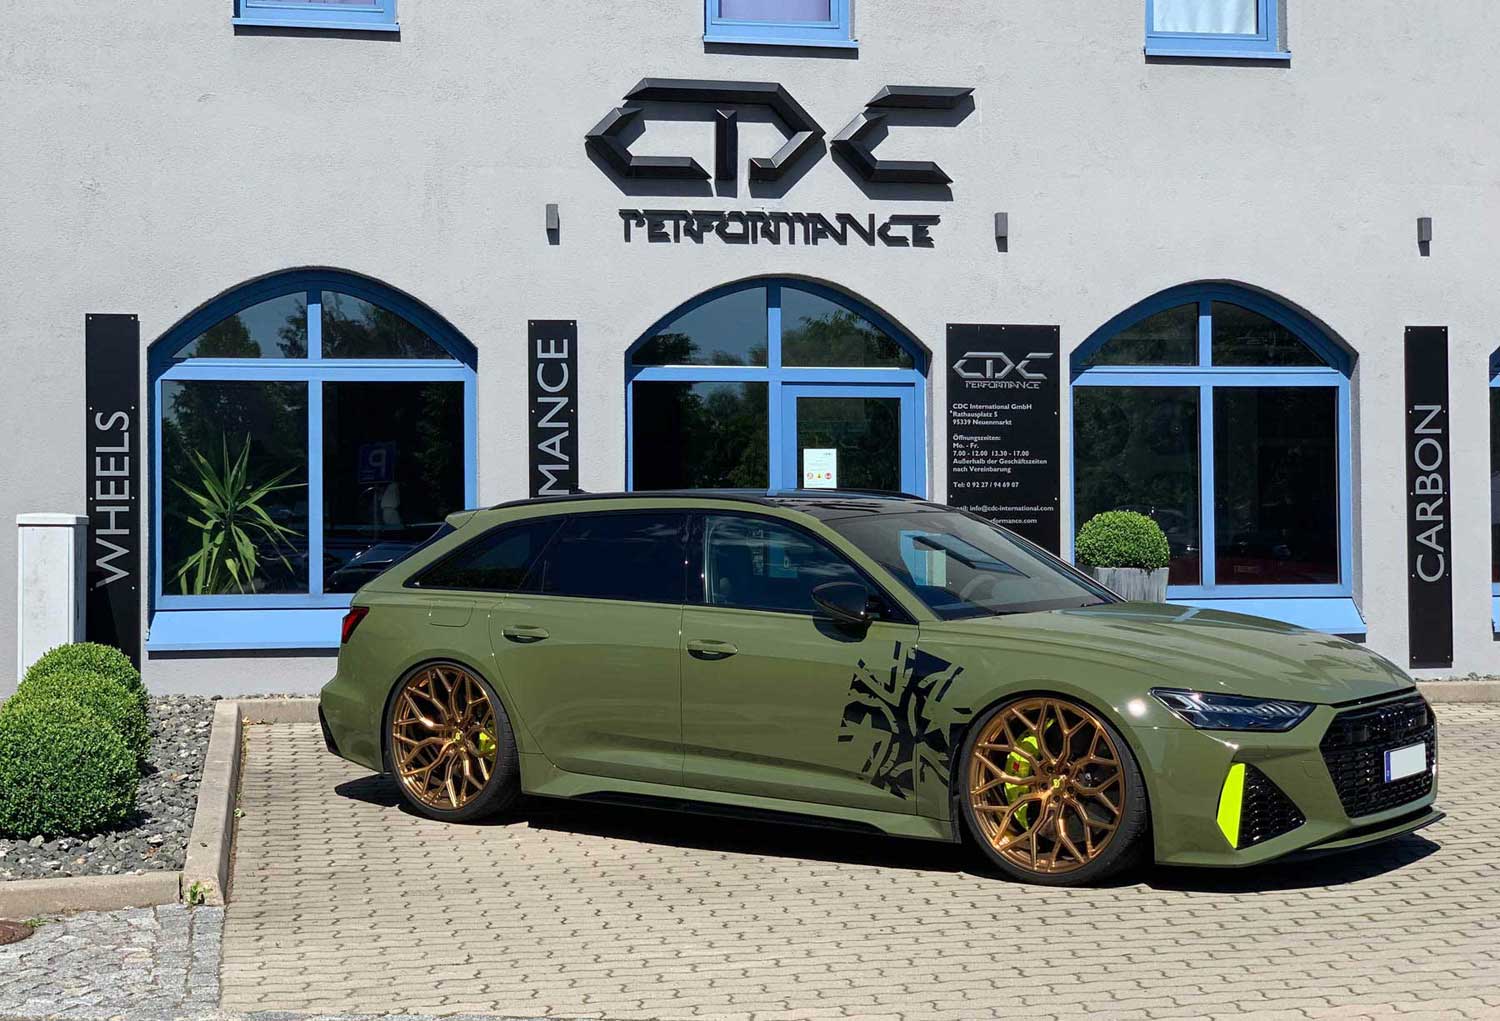 23 Zoll und 1000PS am Audi RS6??